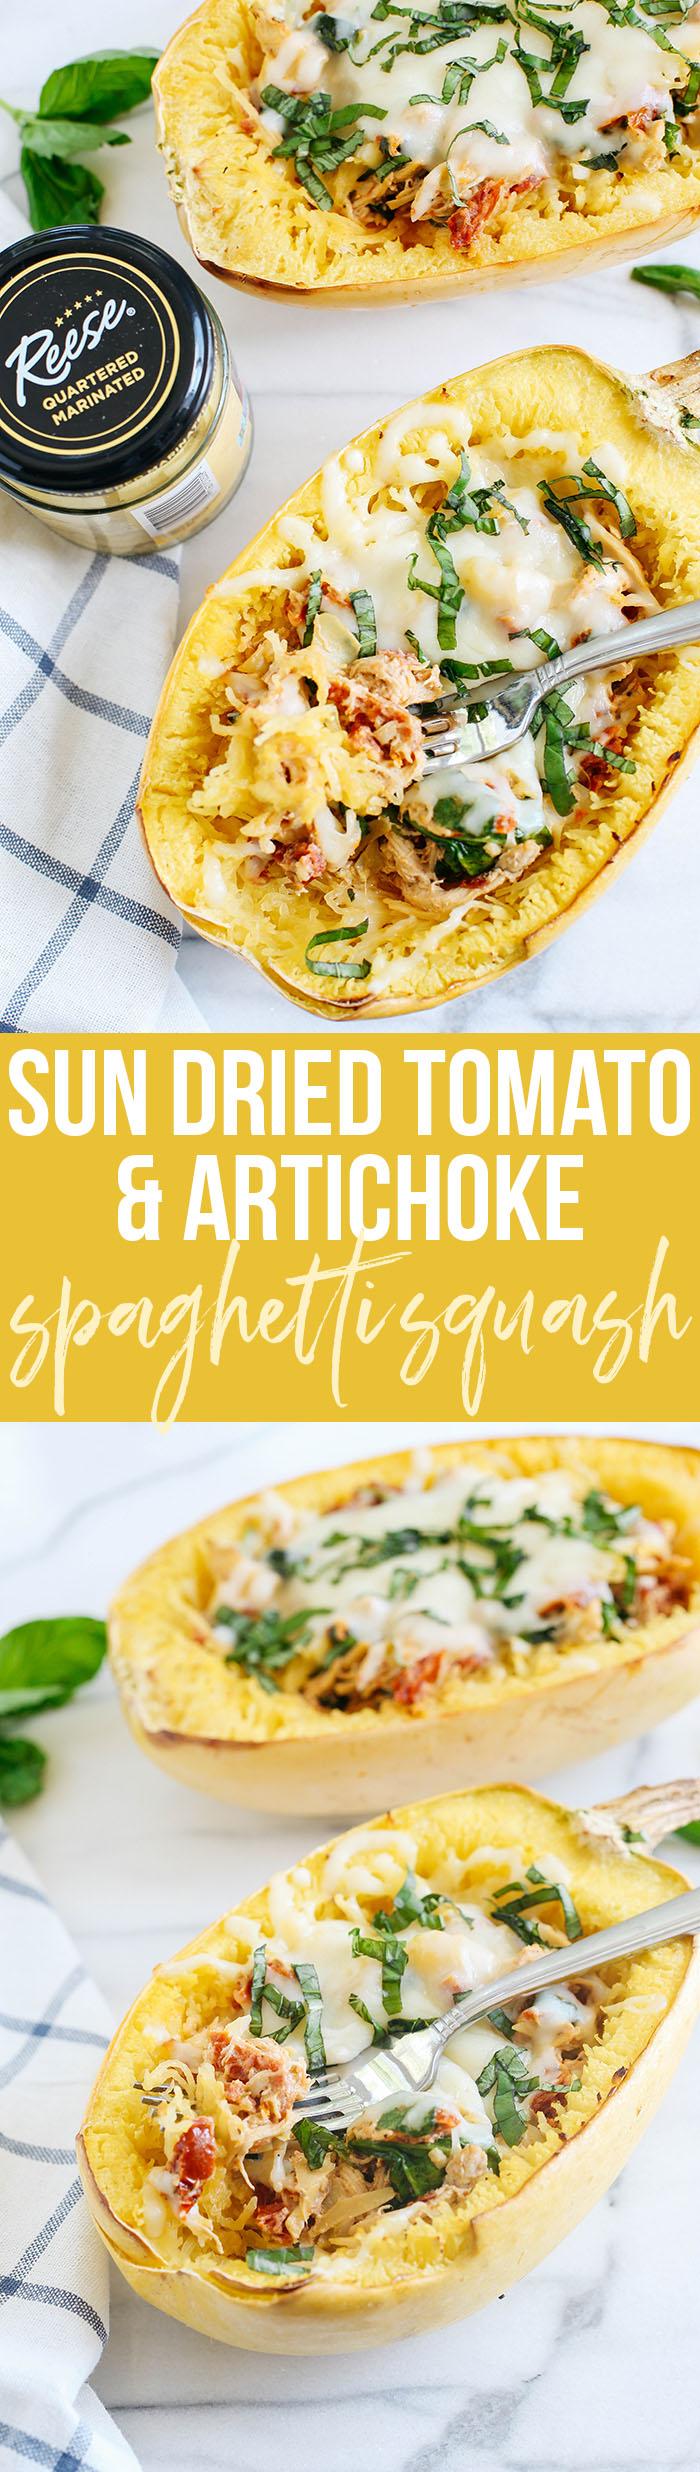 These Sun Dried Tomato and Artichoke Spaghetti Squash Boats are cheesy, delicious and make the perfect weeknight comfort meal that you can enjoy guilt-free!